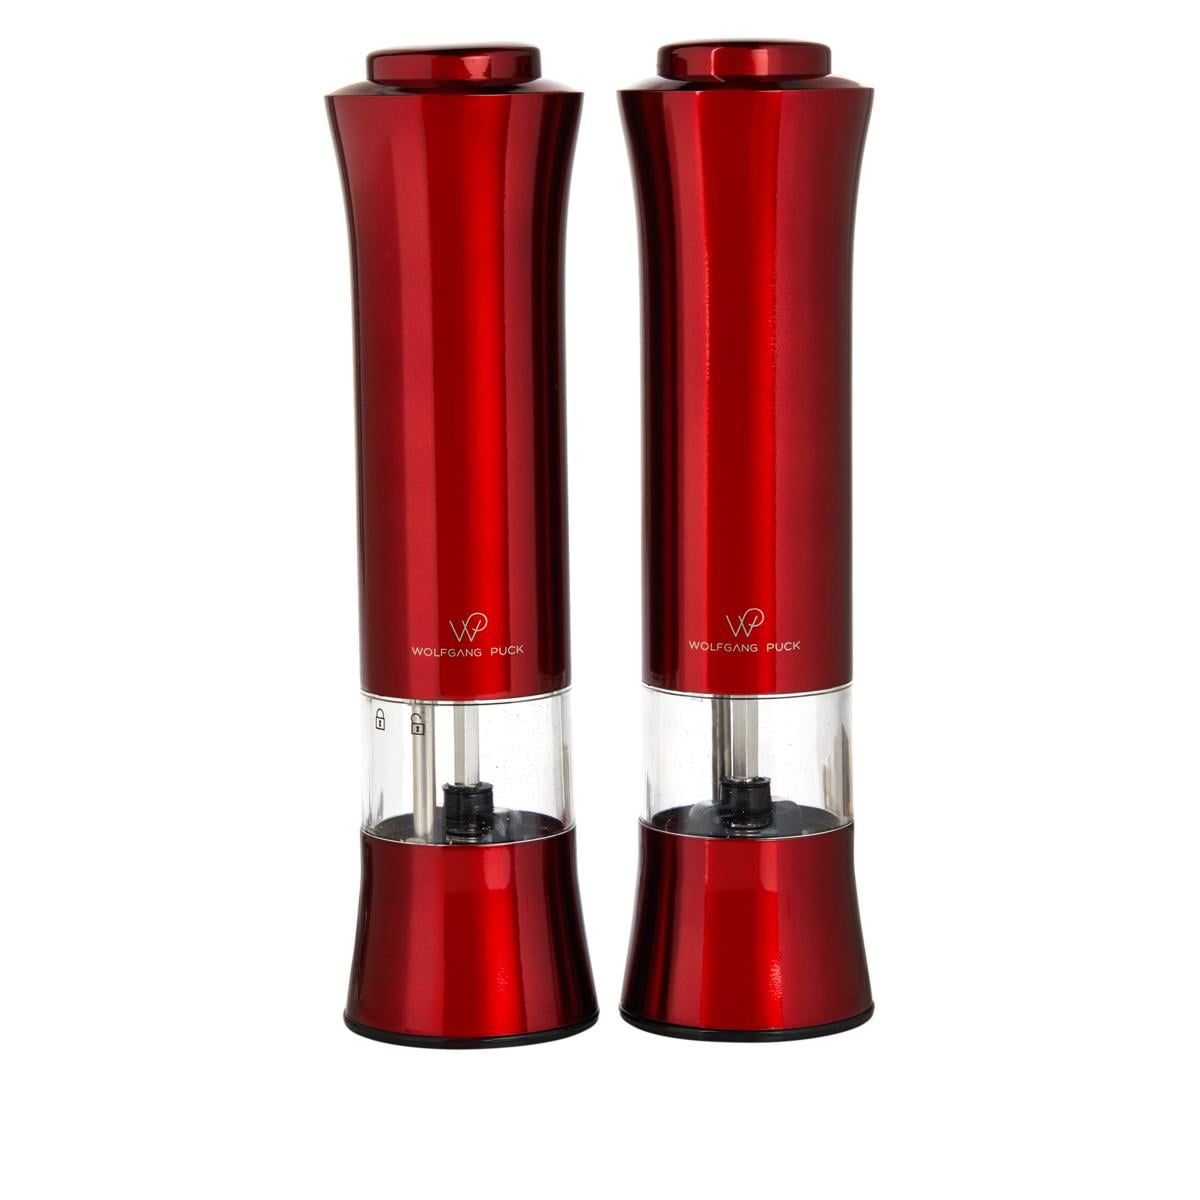 Wolfgang Puck 2-pack Adjustable Stainless Steel Spice Mills Model